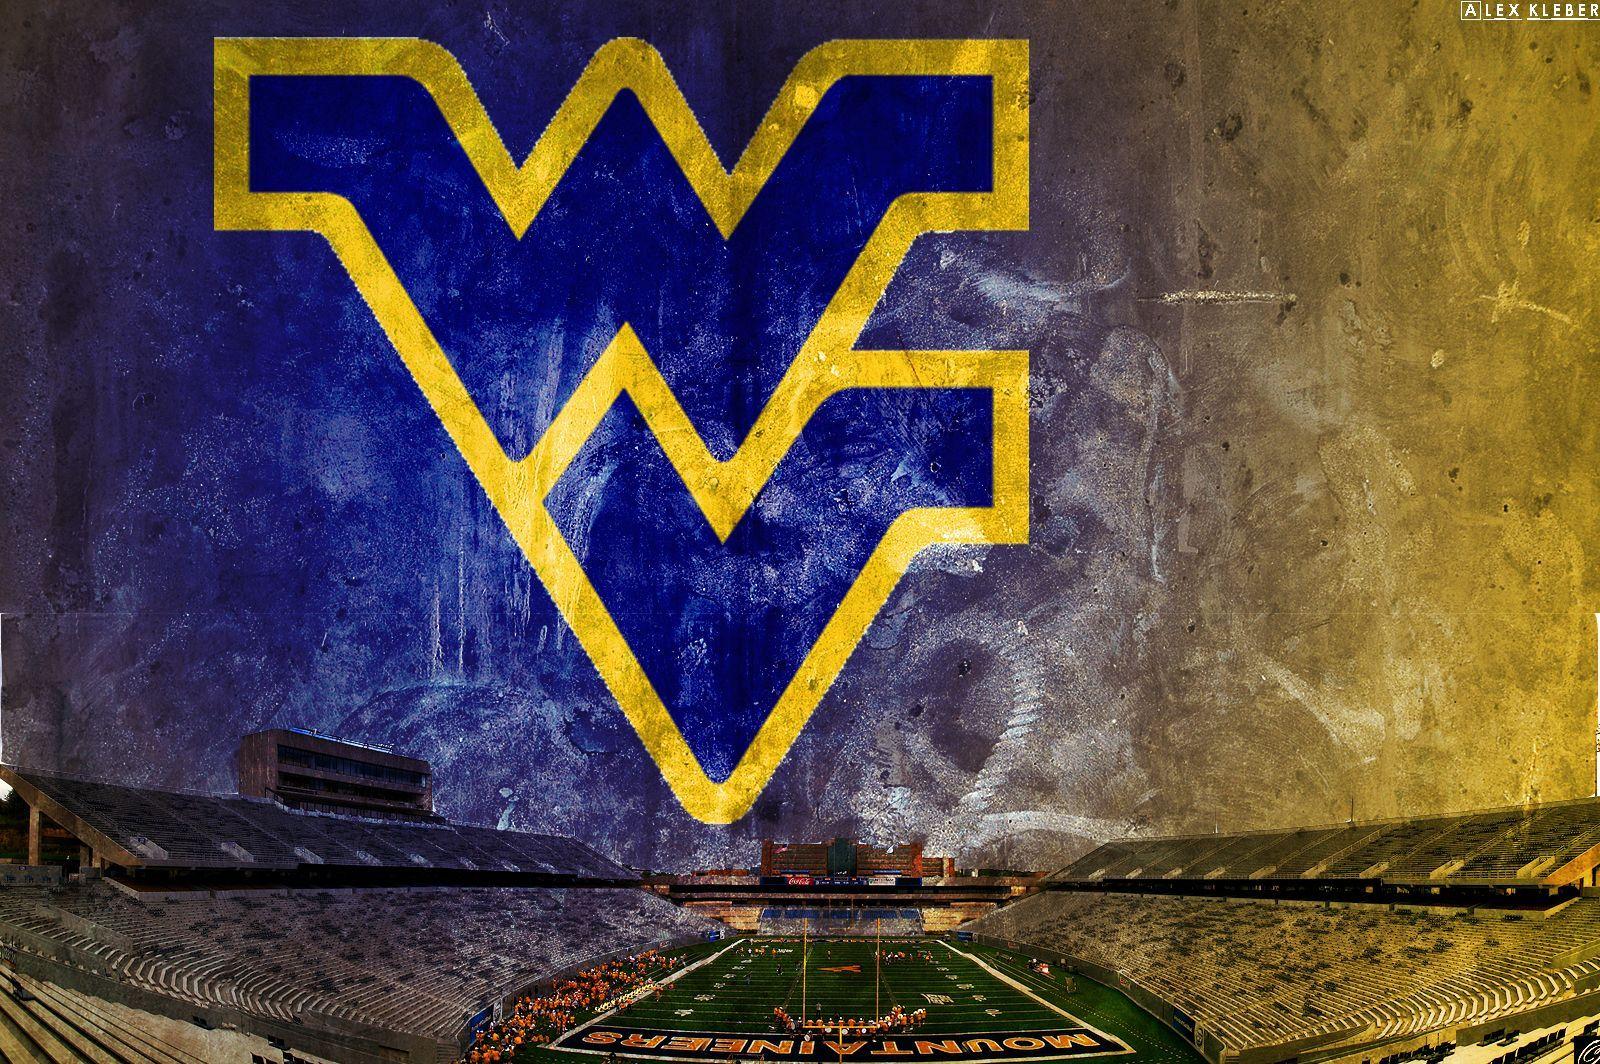 WVU Football Logo - pictures of wvu mountaineers | WVU Wallpaper by klebz | Things I ...